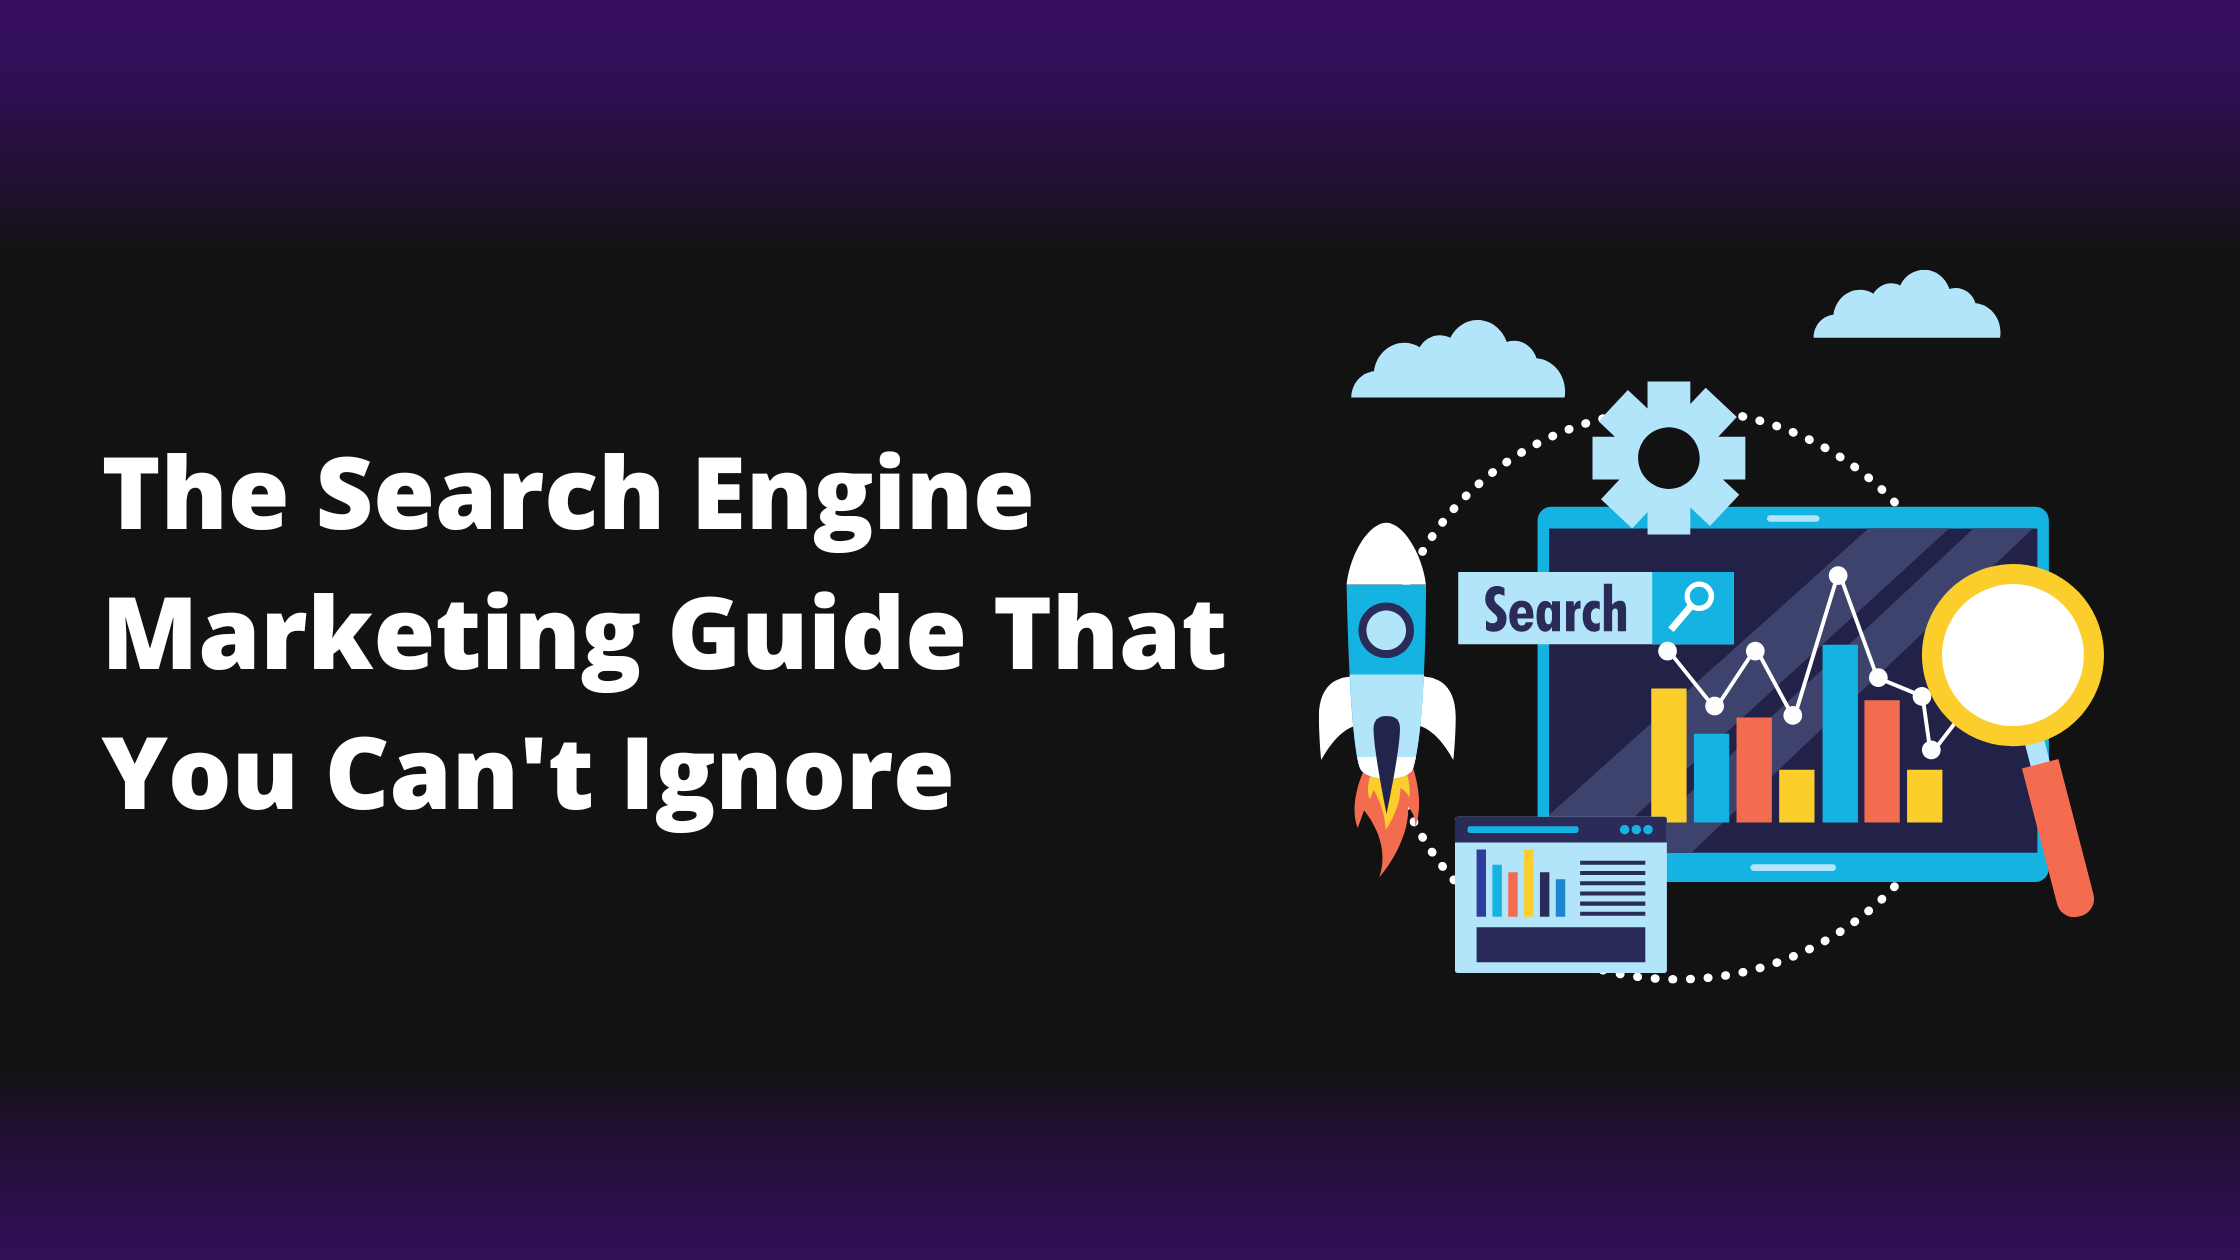 The Search Engine Marketing Guide That You Can’t Ignore